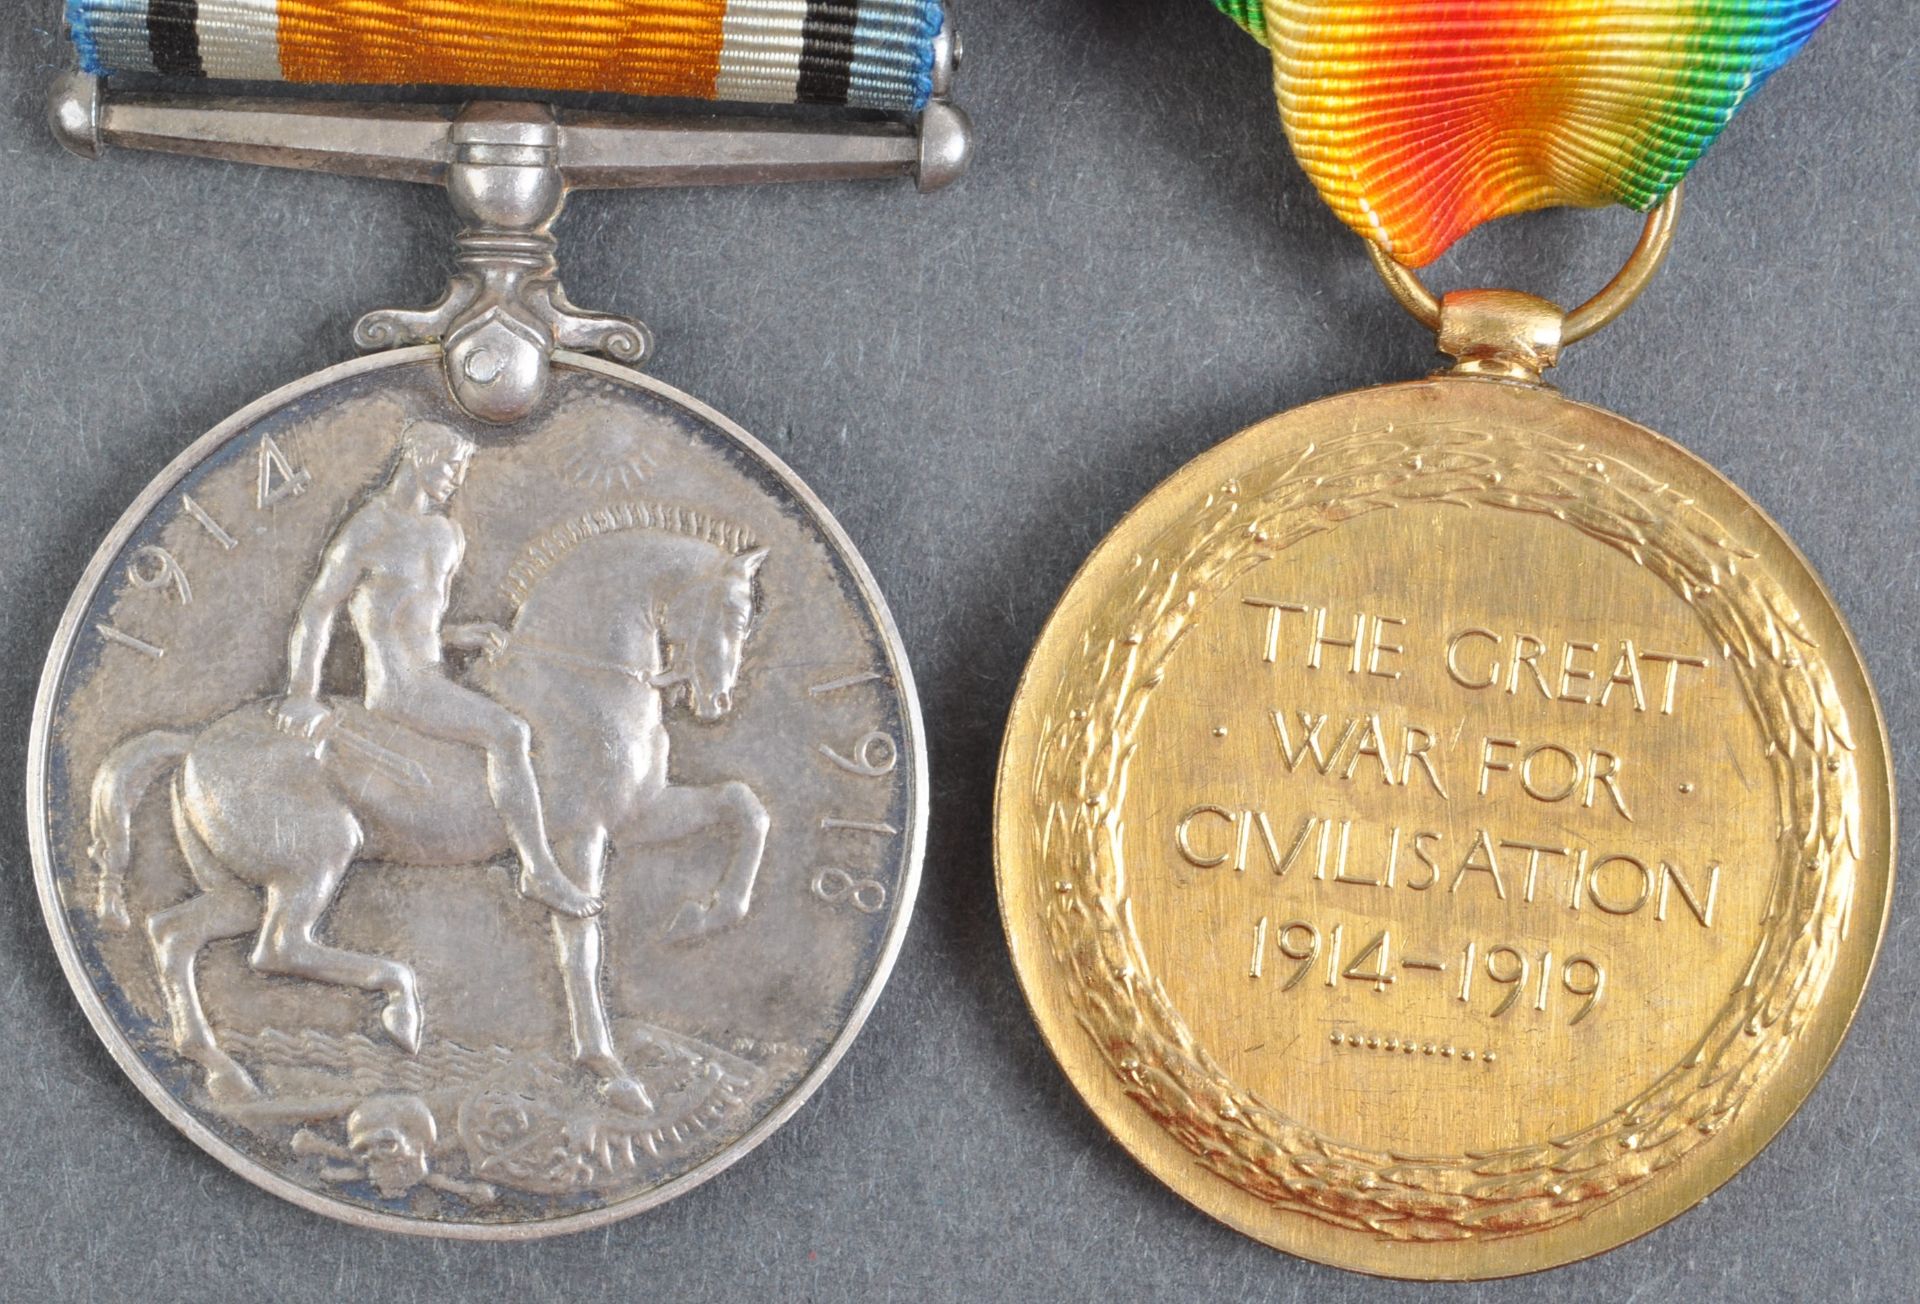 WWI FIRST WORLD WAR MEDAL PAIR - PRIVATE IN ROYAL FUSILIERS - Image 3 of 5